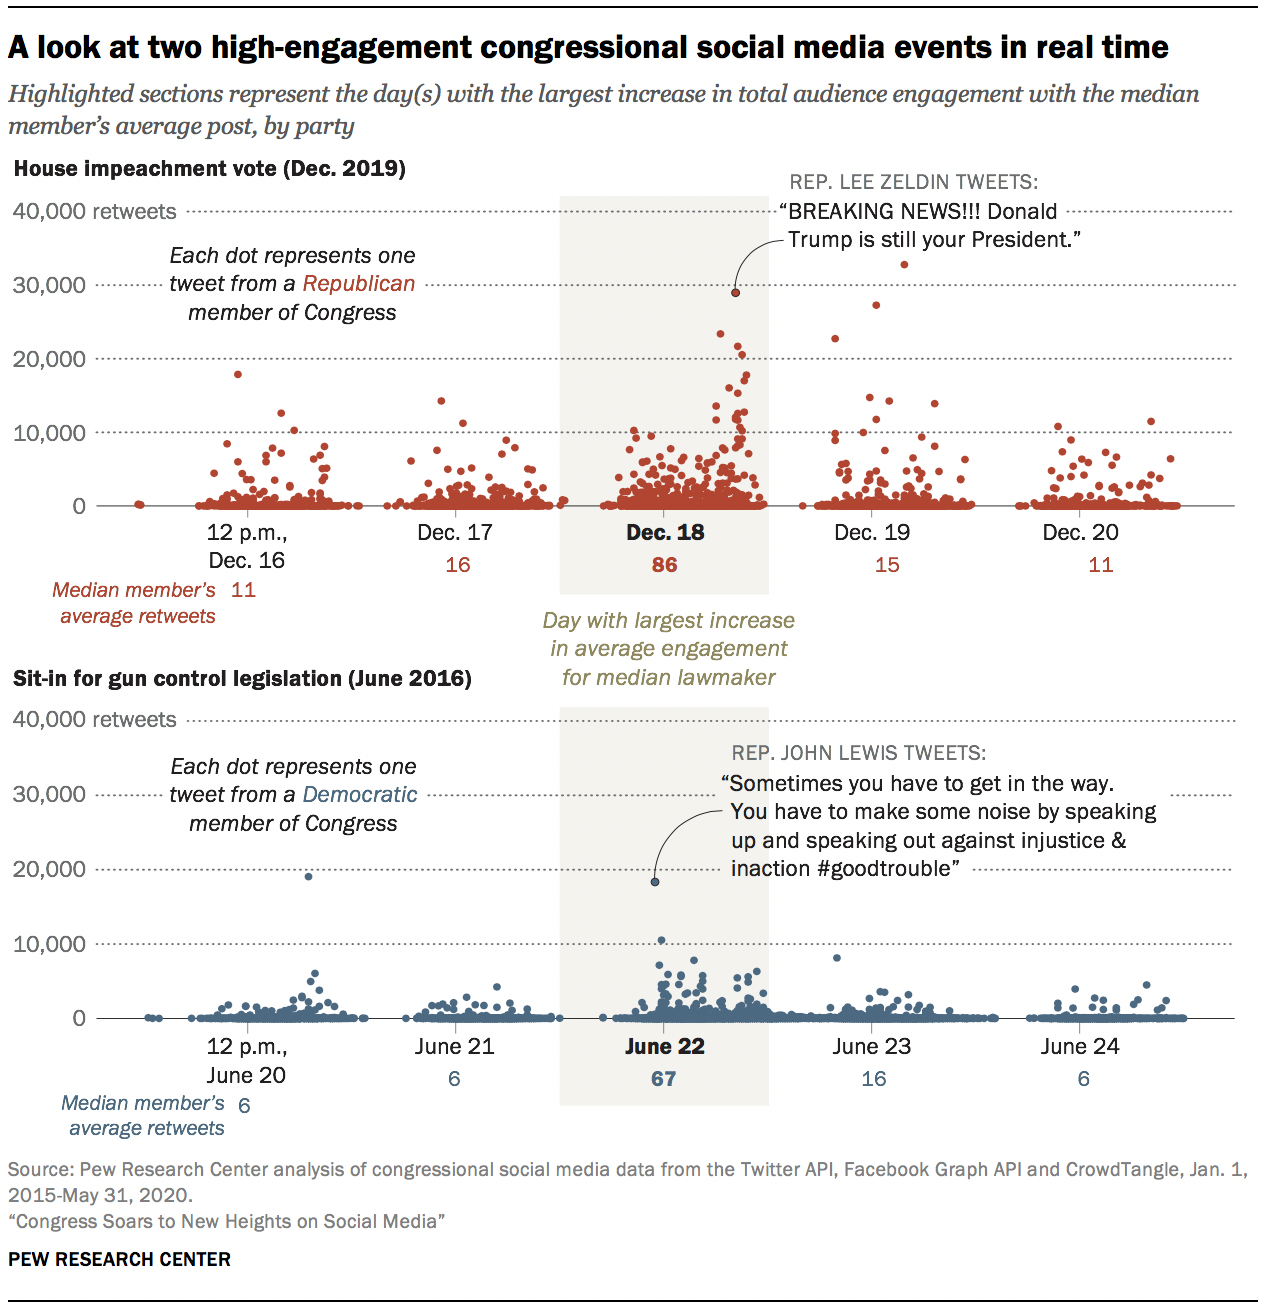 A look at two high-engagement congressional social media events in real time